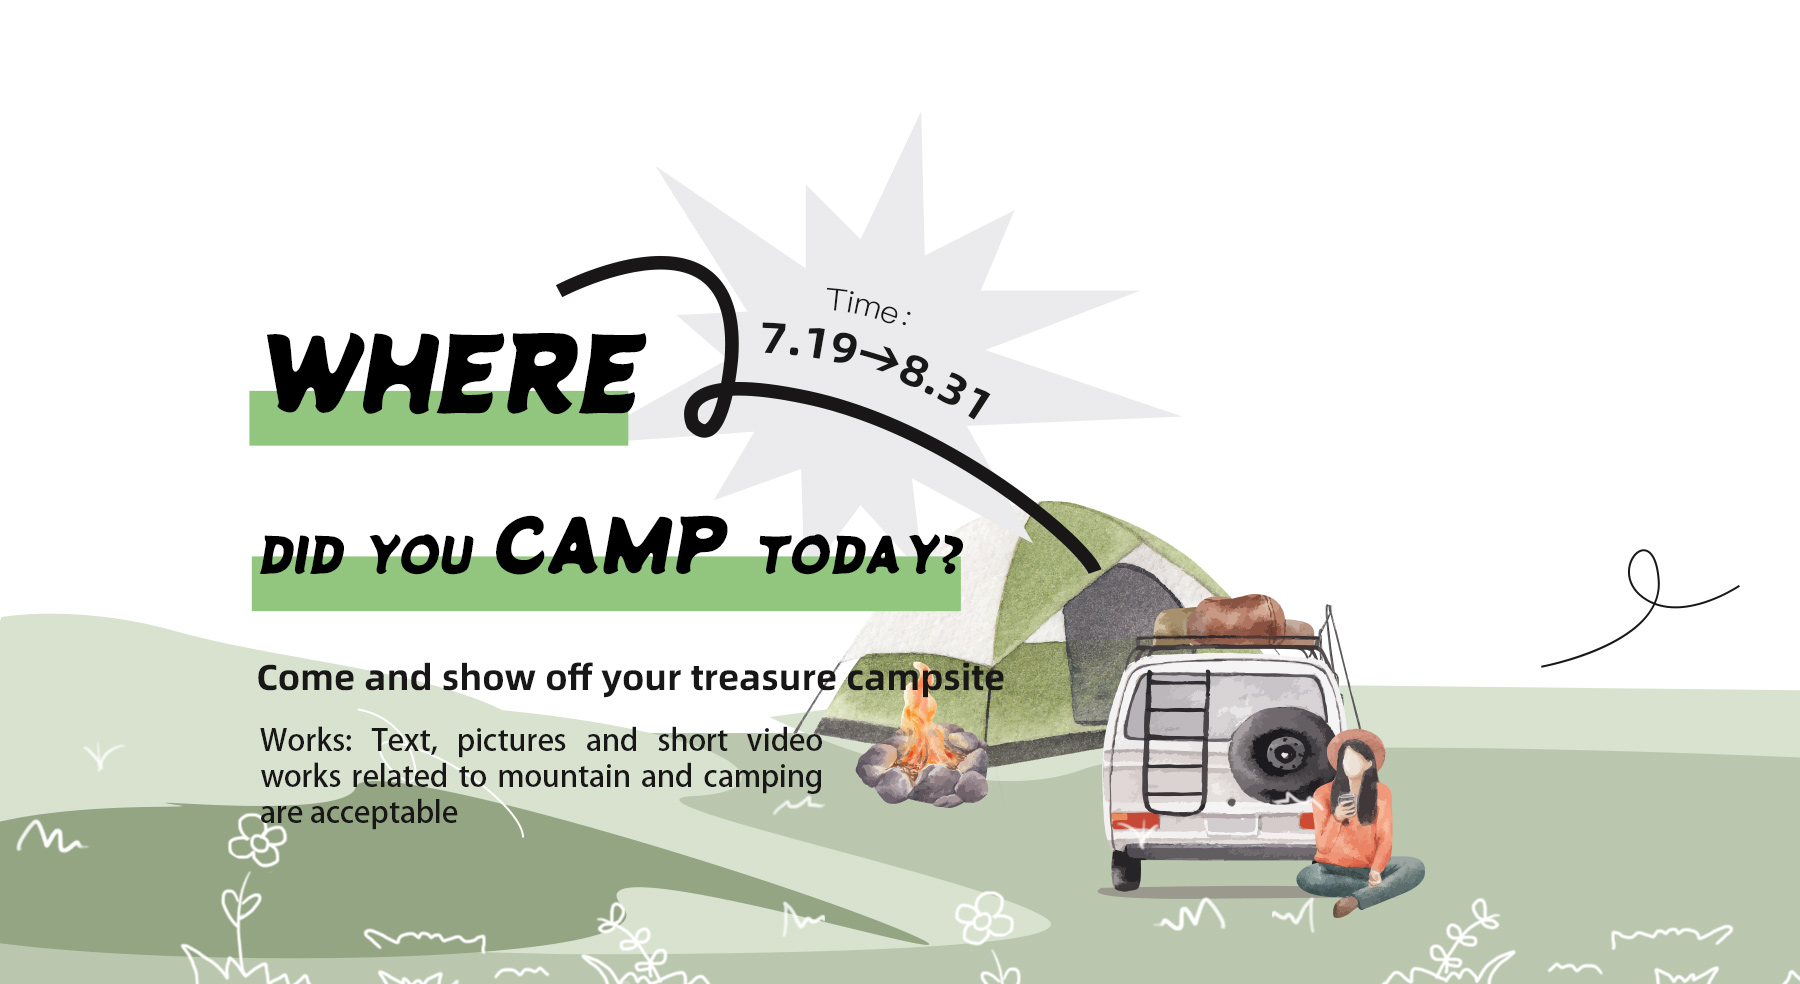 Where did you camp today? Come and show off your treasure campsite